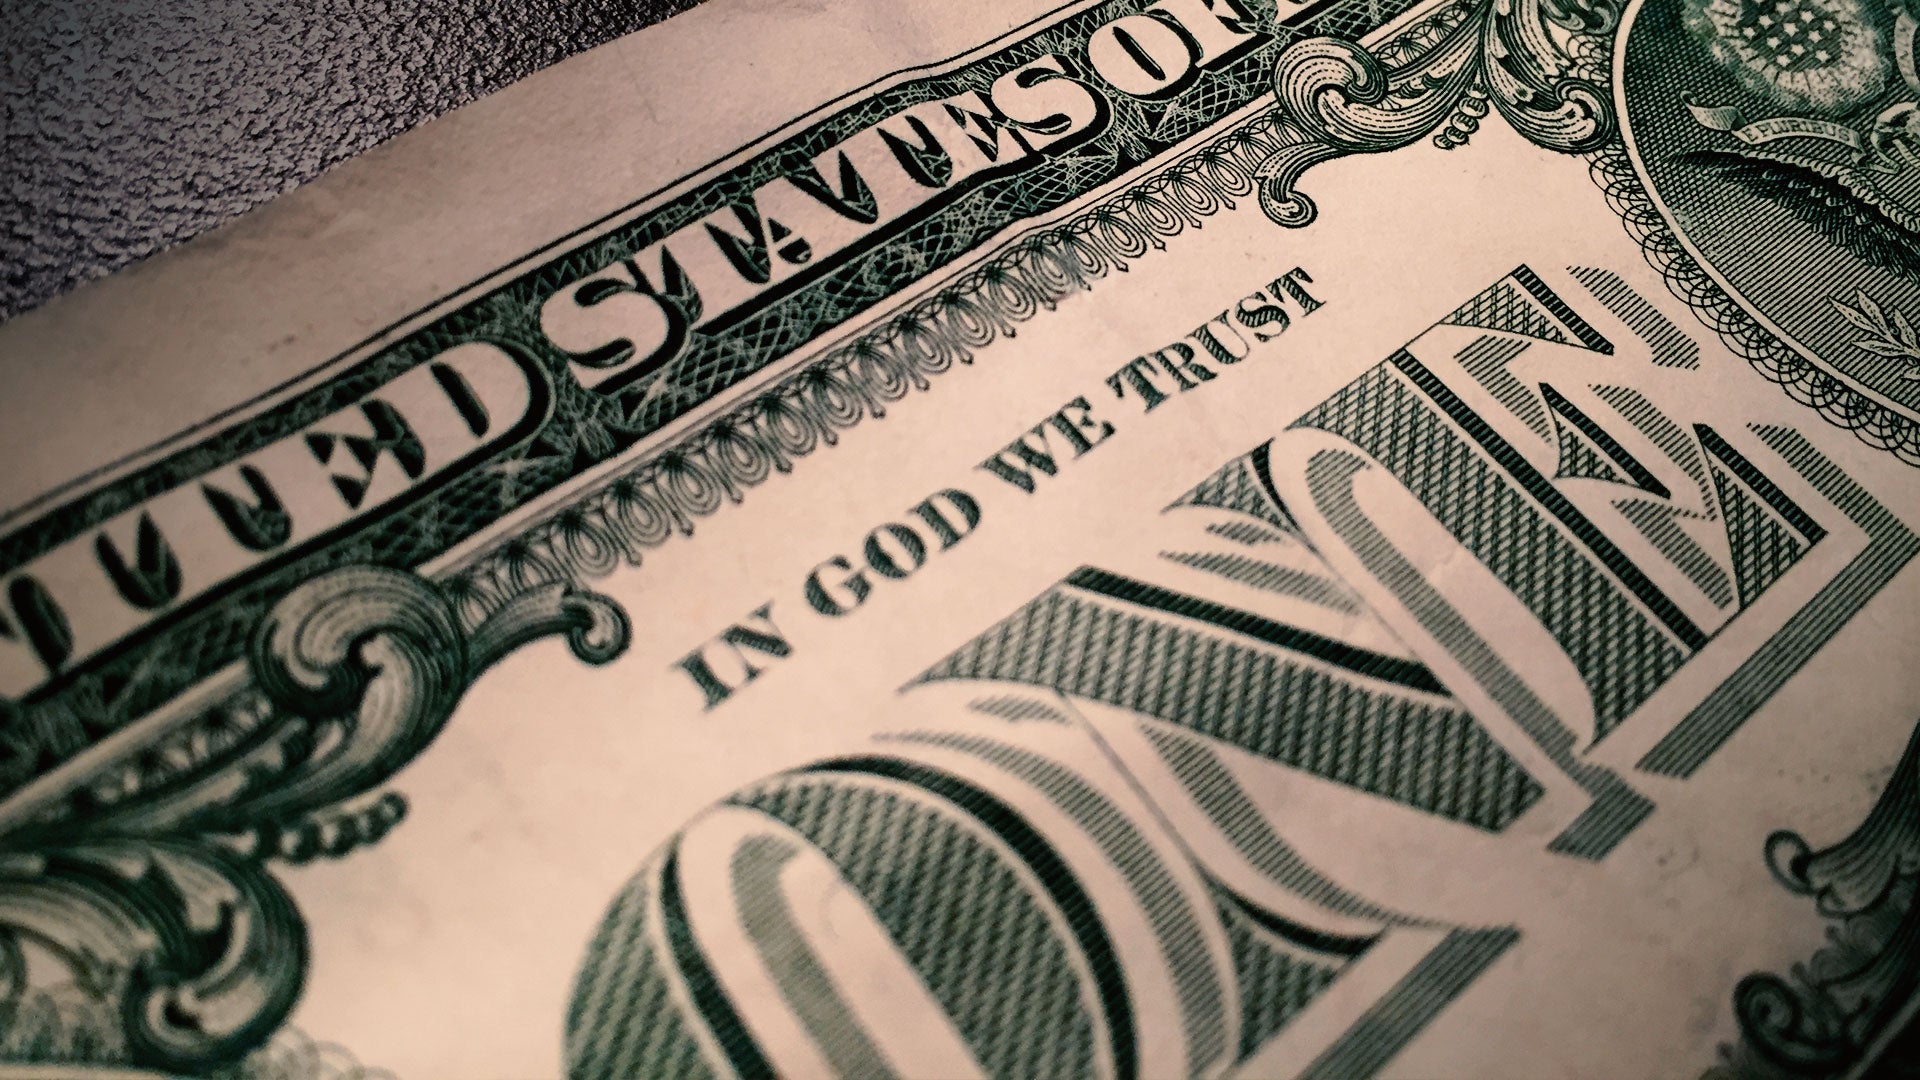 Dollars out on top on god. In God we Trust доллар купюра. Купюра США “in God we Trust”. Надпись на долларе in God. Доллар Бог.